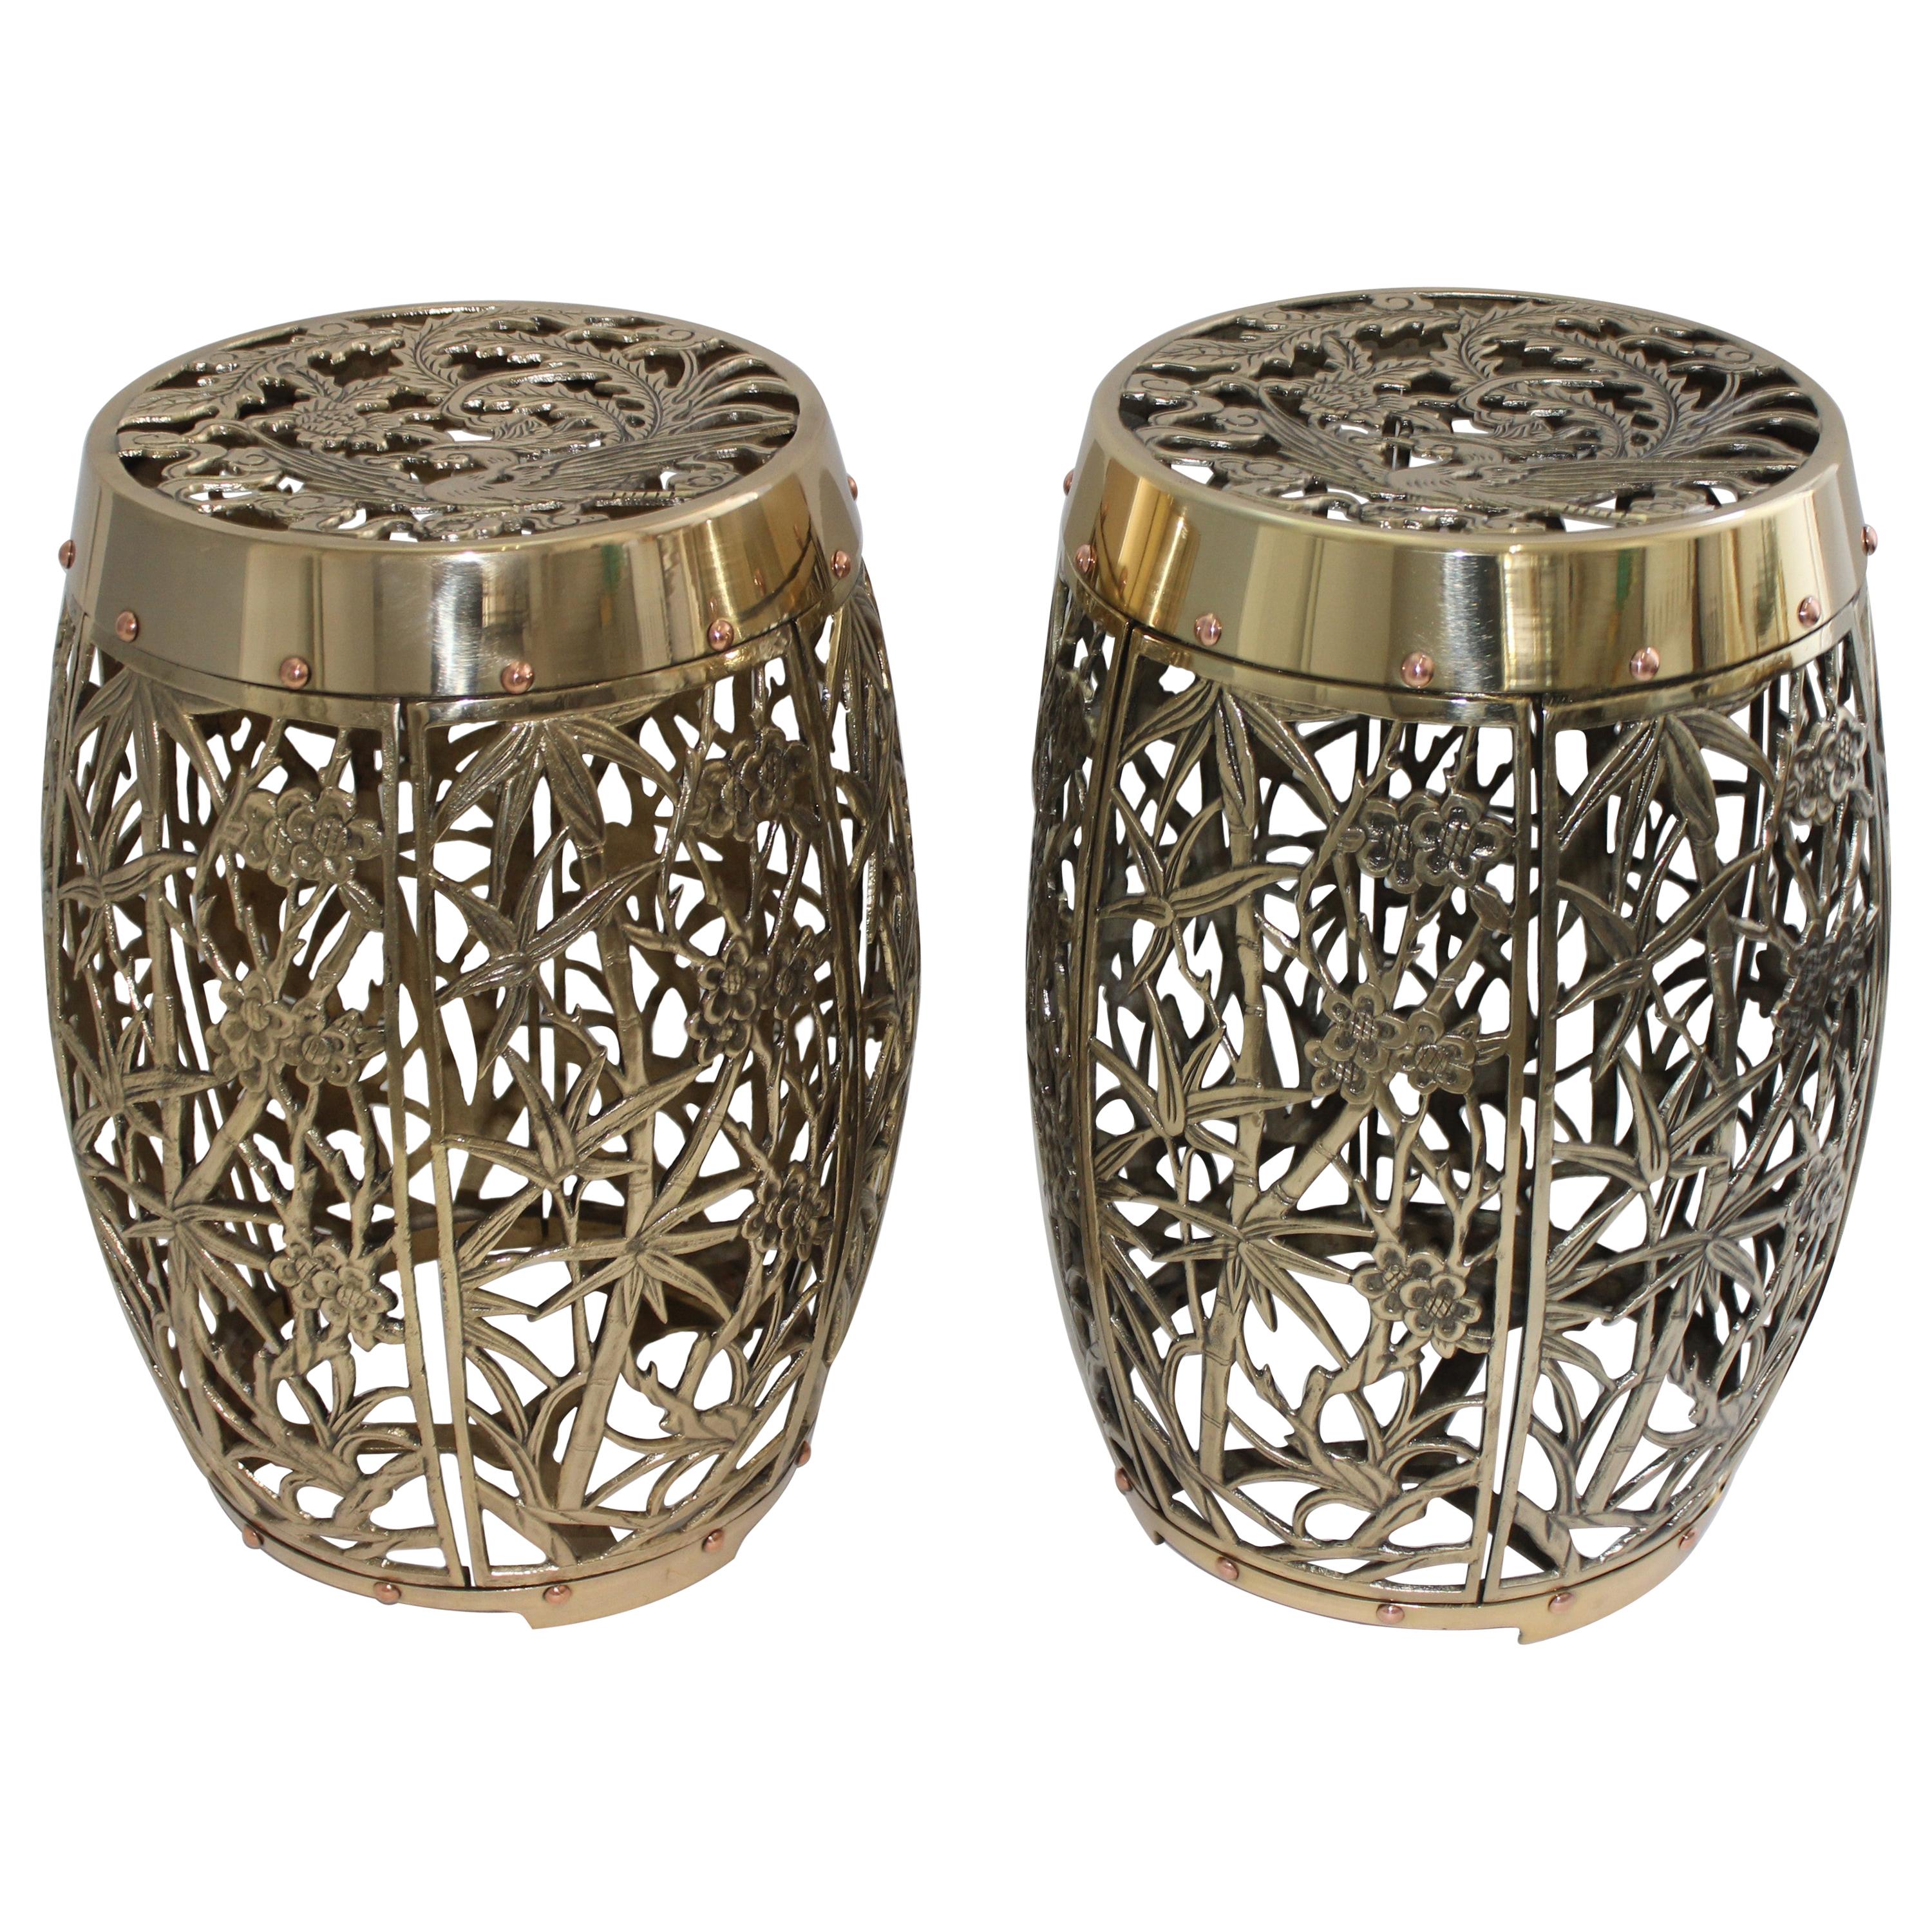 Pair of Garden Stools Polished Brass Copper Fretwork